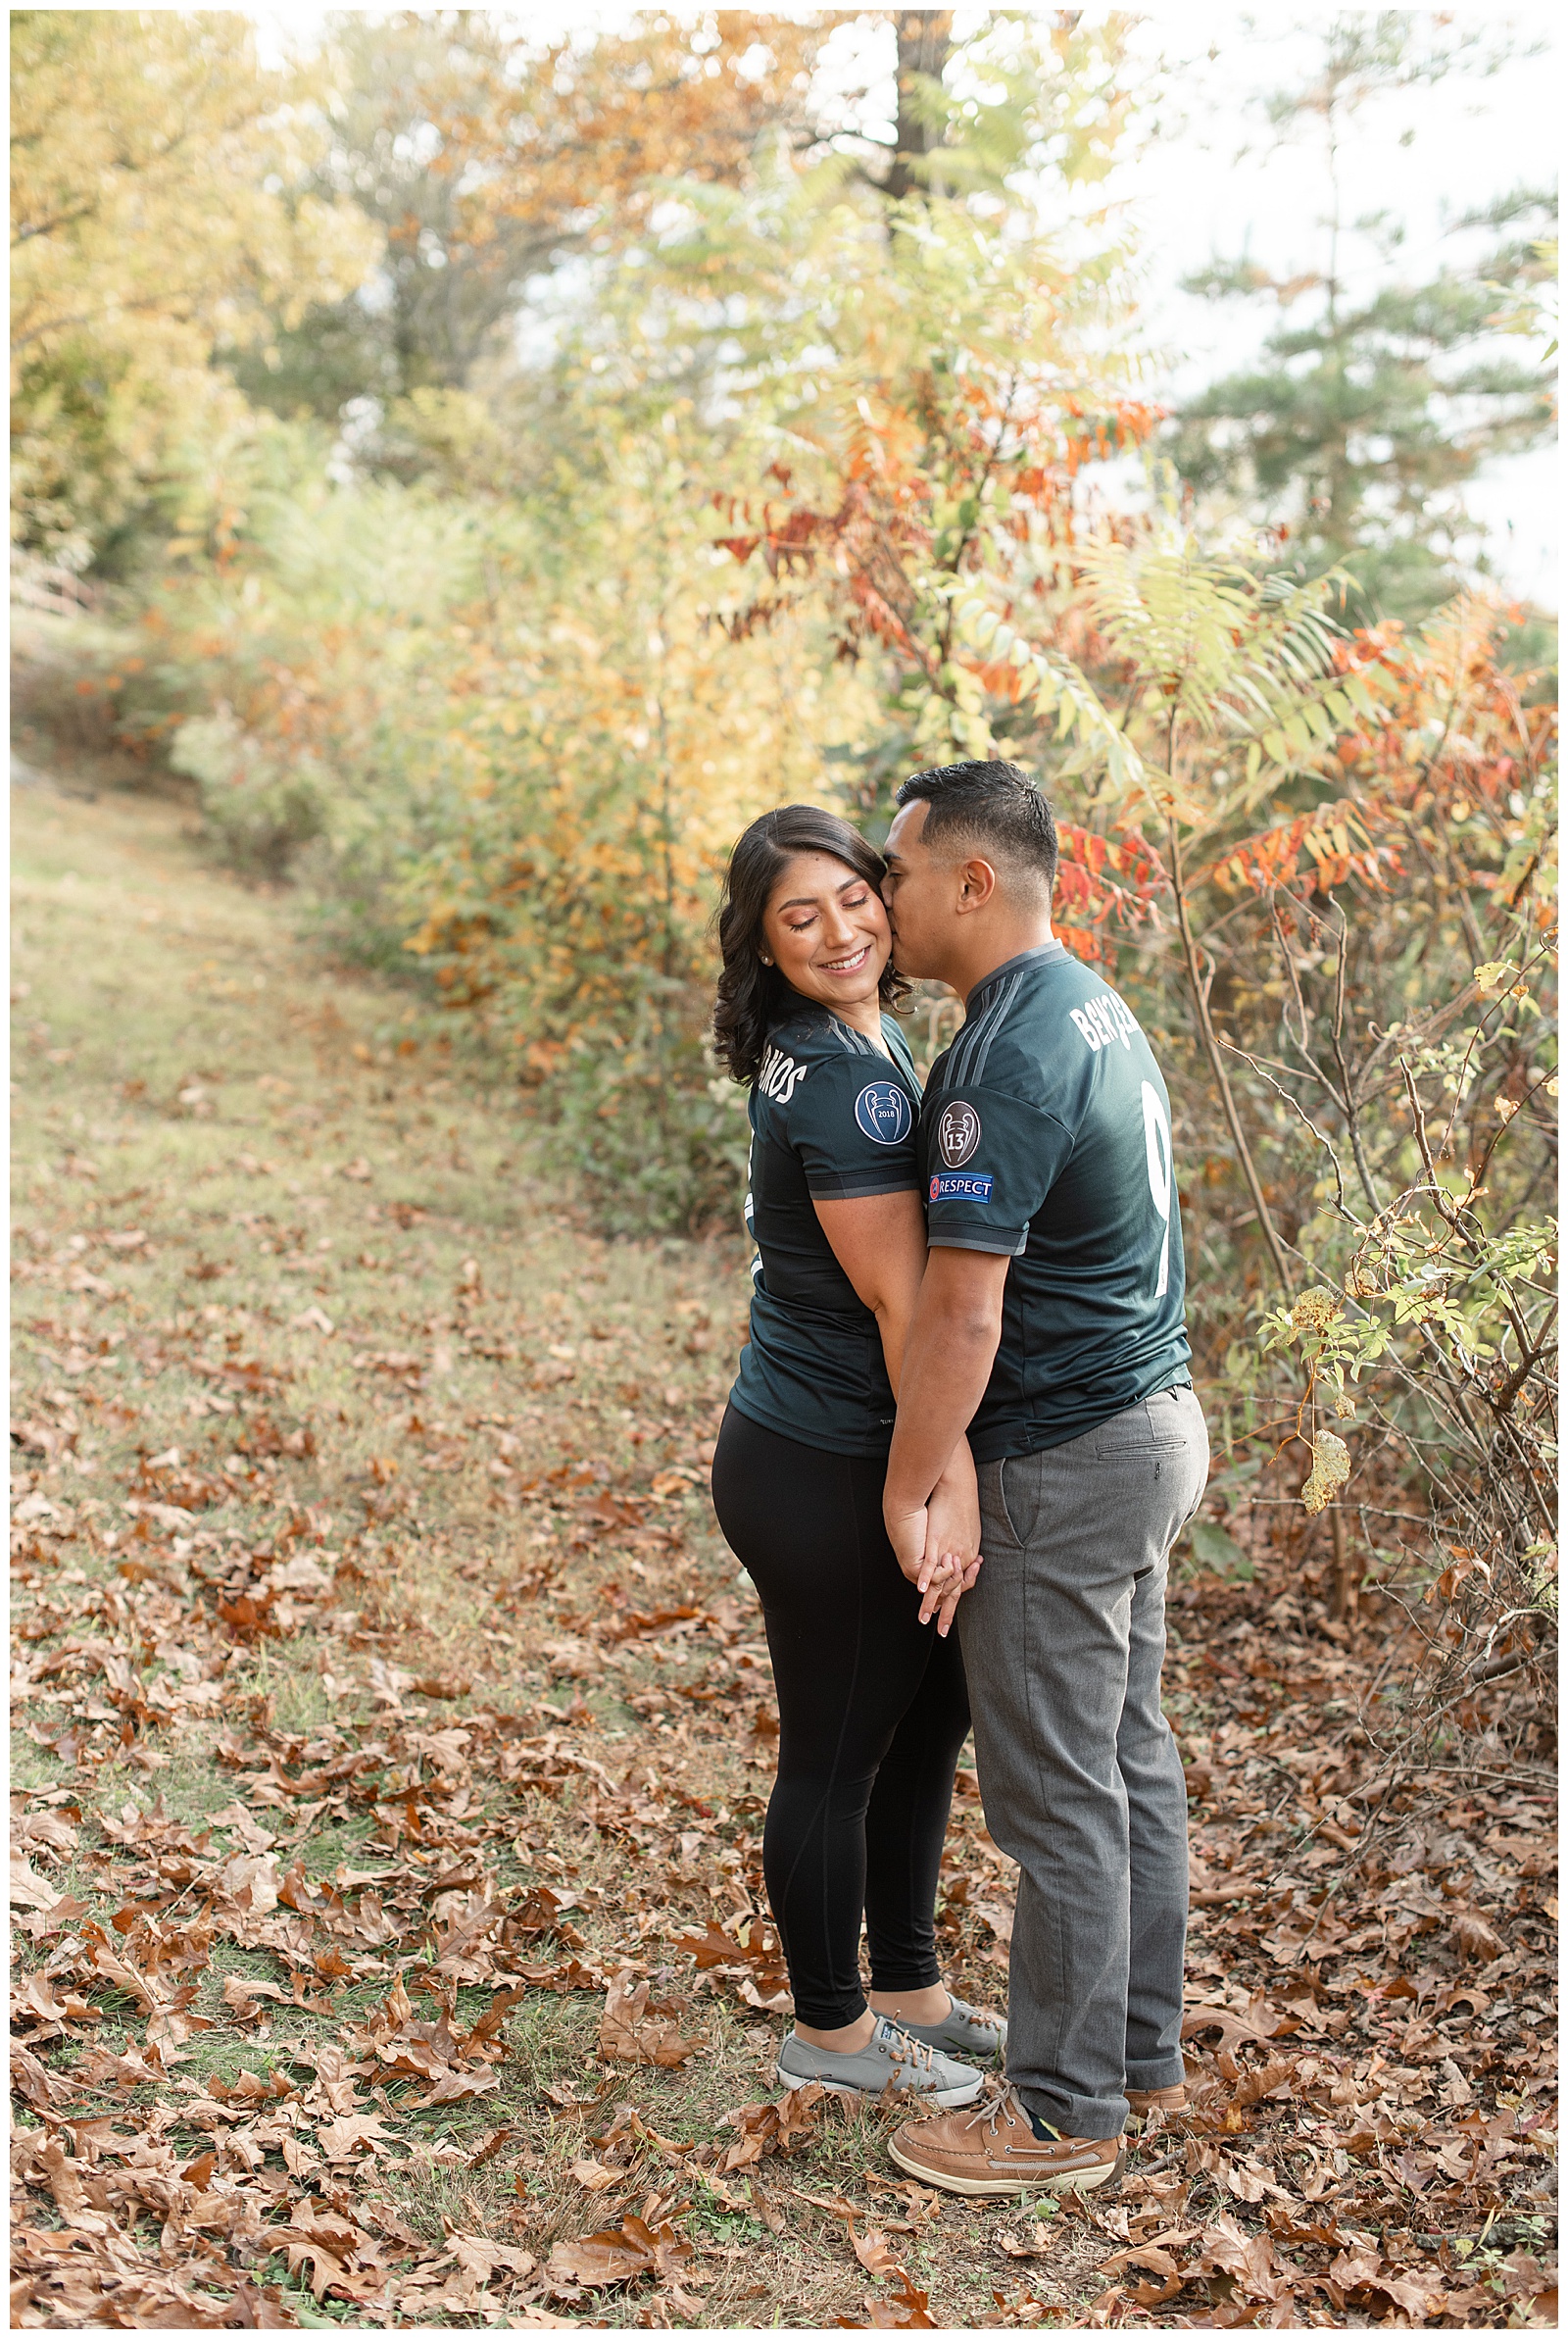 engaged couple wearing matching soccer jerseys standing close holding hands by colorful leaves at pinnacle point